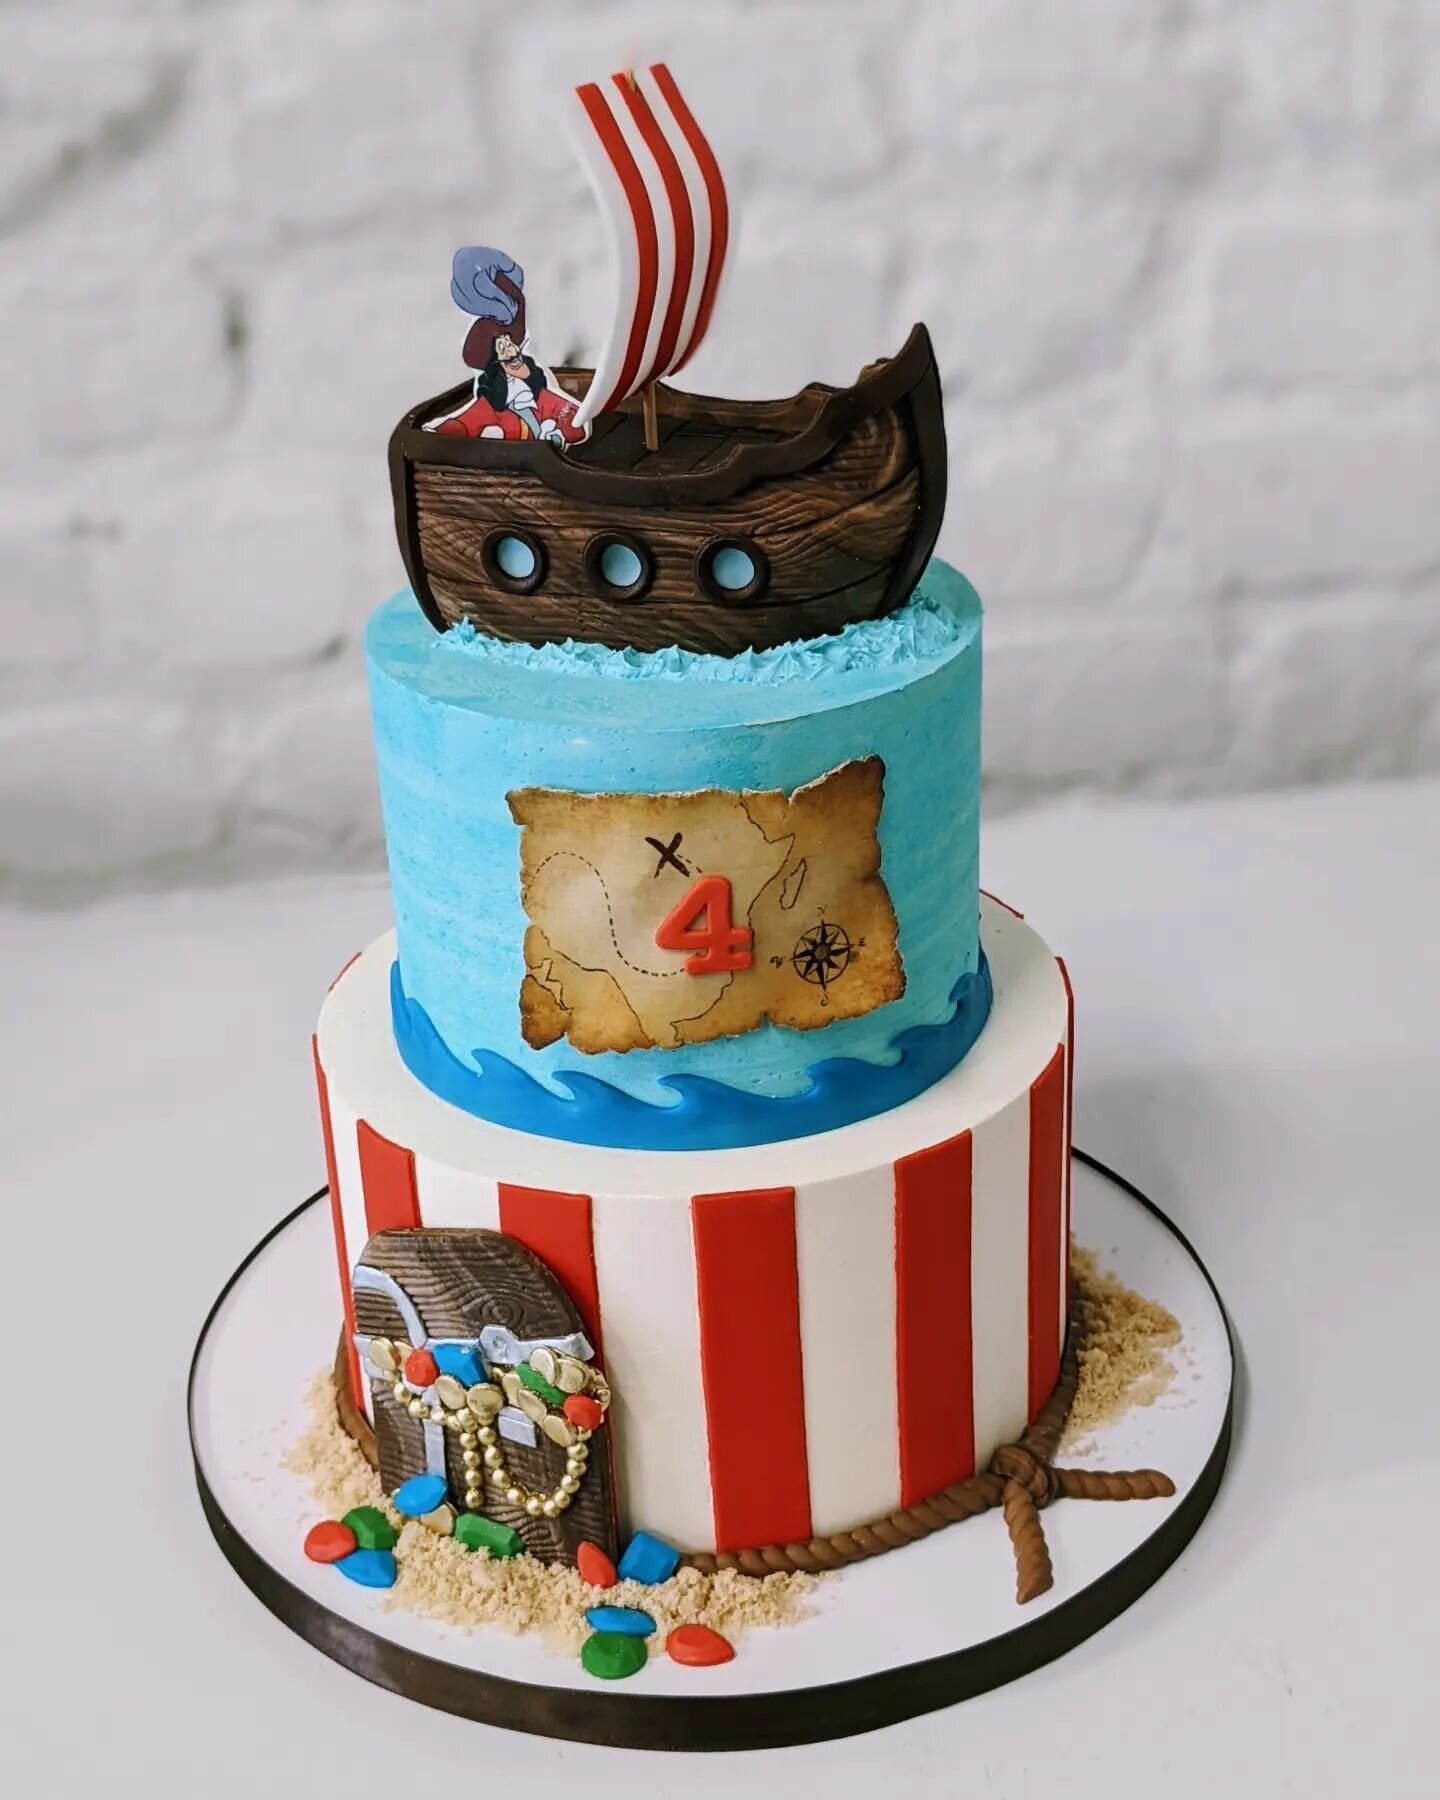 Shiver me timbers! Cute 4th birthday cake with an edible 3D pirate ship topper!
⠀
Decorator: @marj.jpg